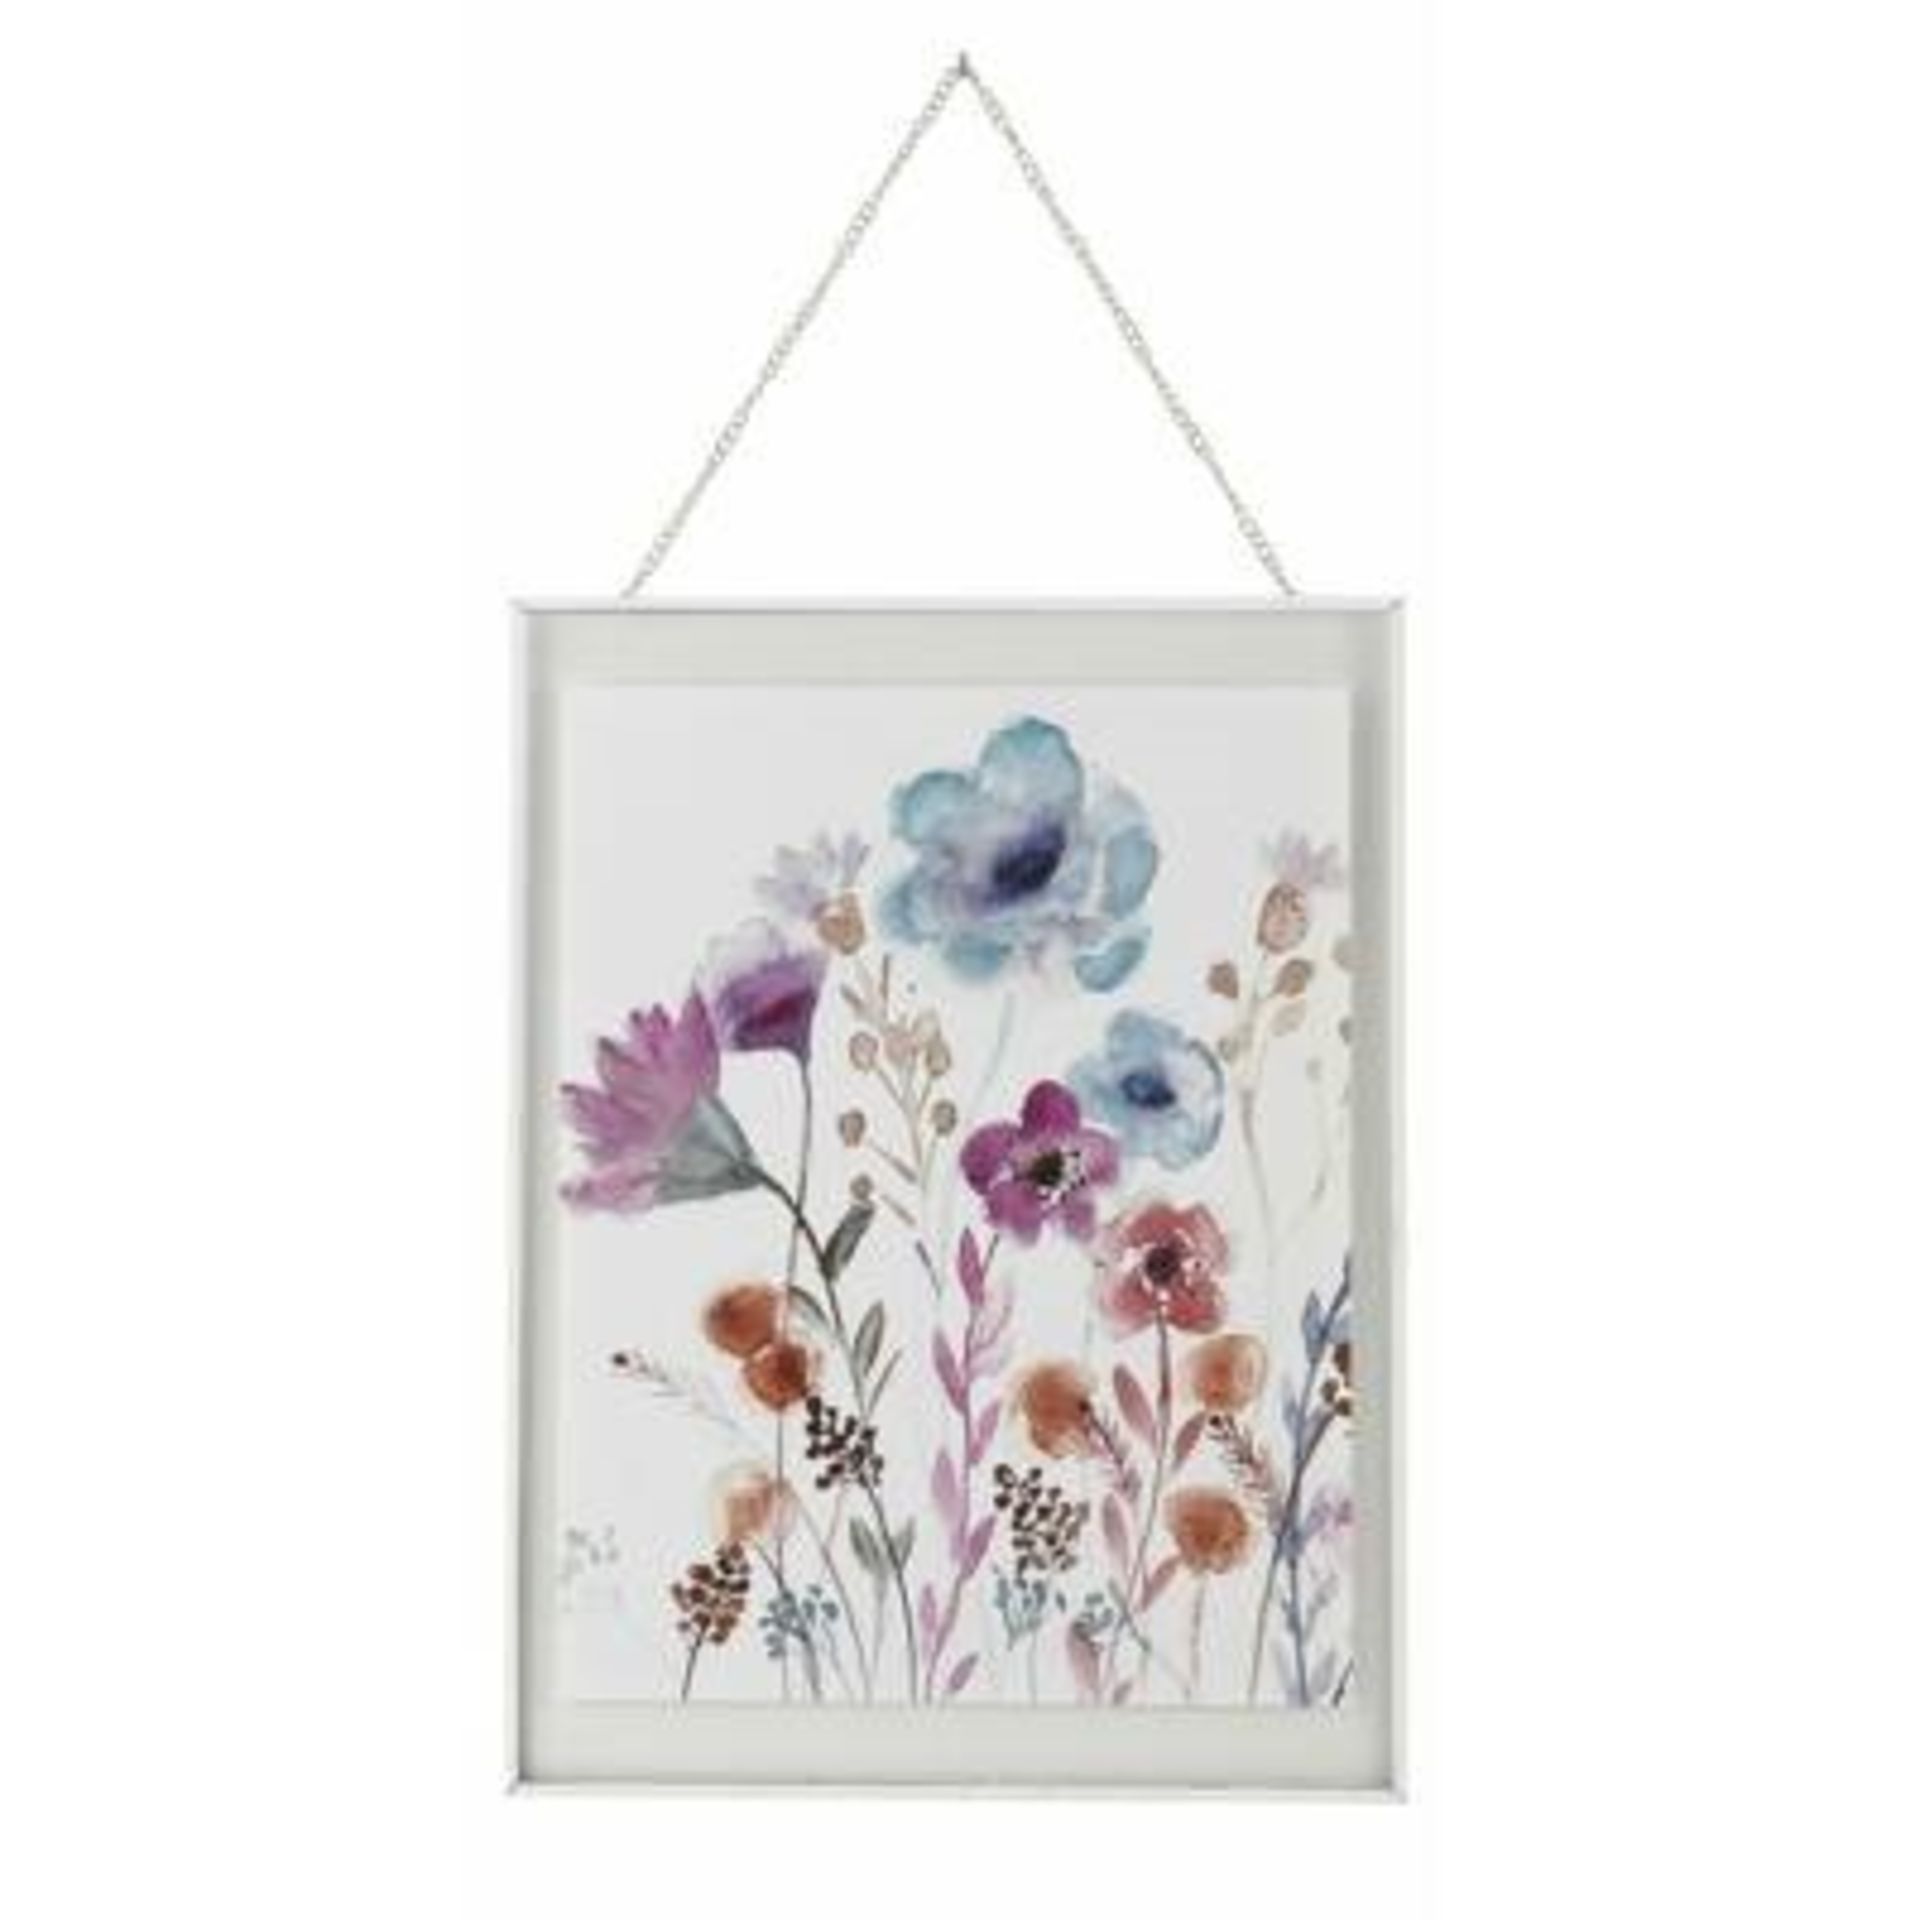 1 BRAND NEW BOXED ARTHOUSE HANGING FLORAL FOREST GLASS PRINT WALL ART, 30CM X 40CM / RRP £19.99 (